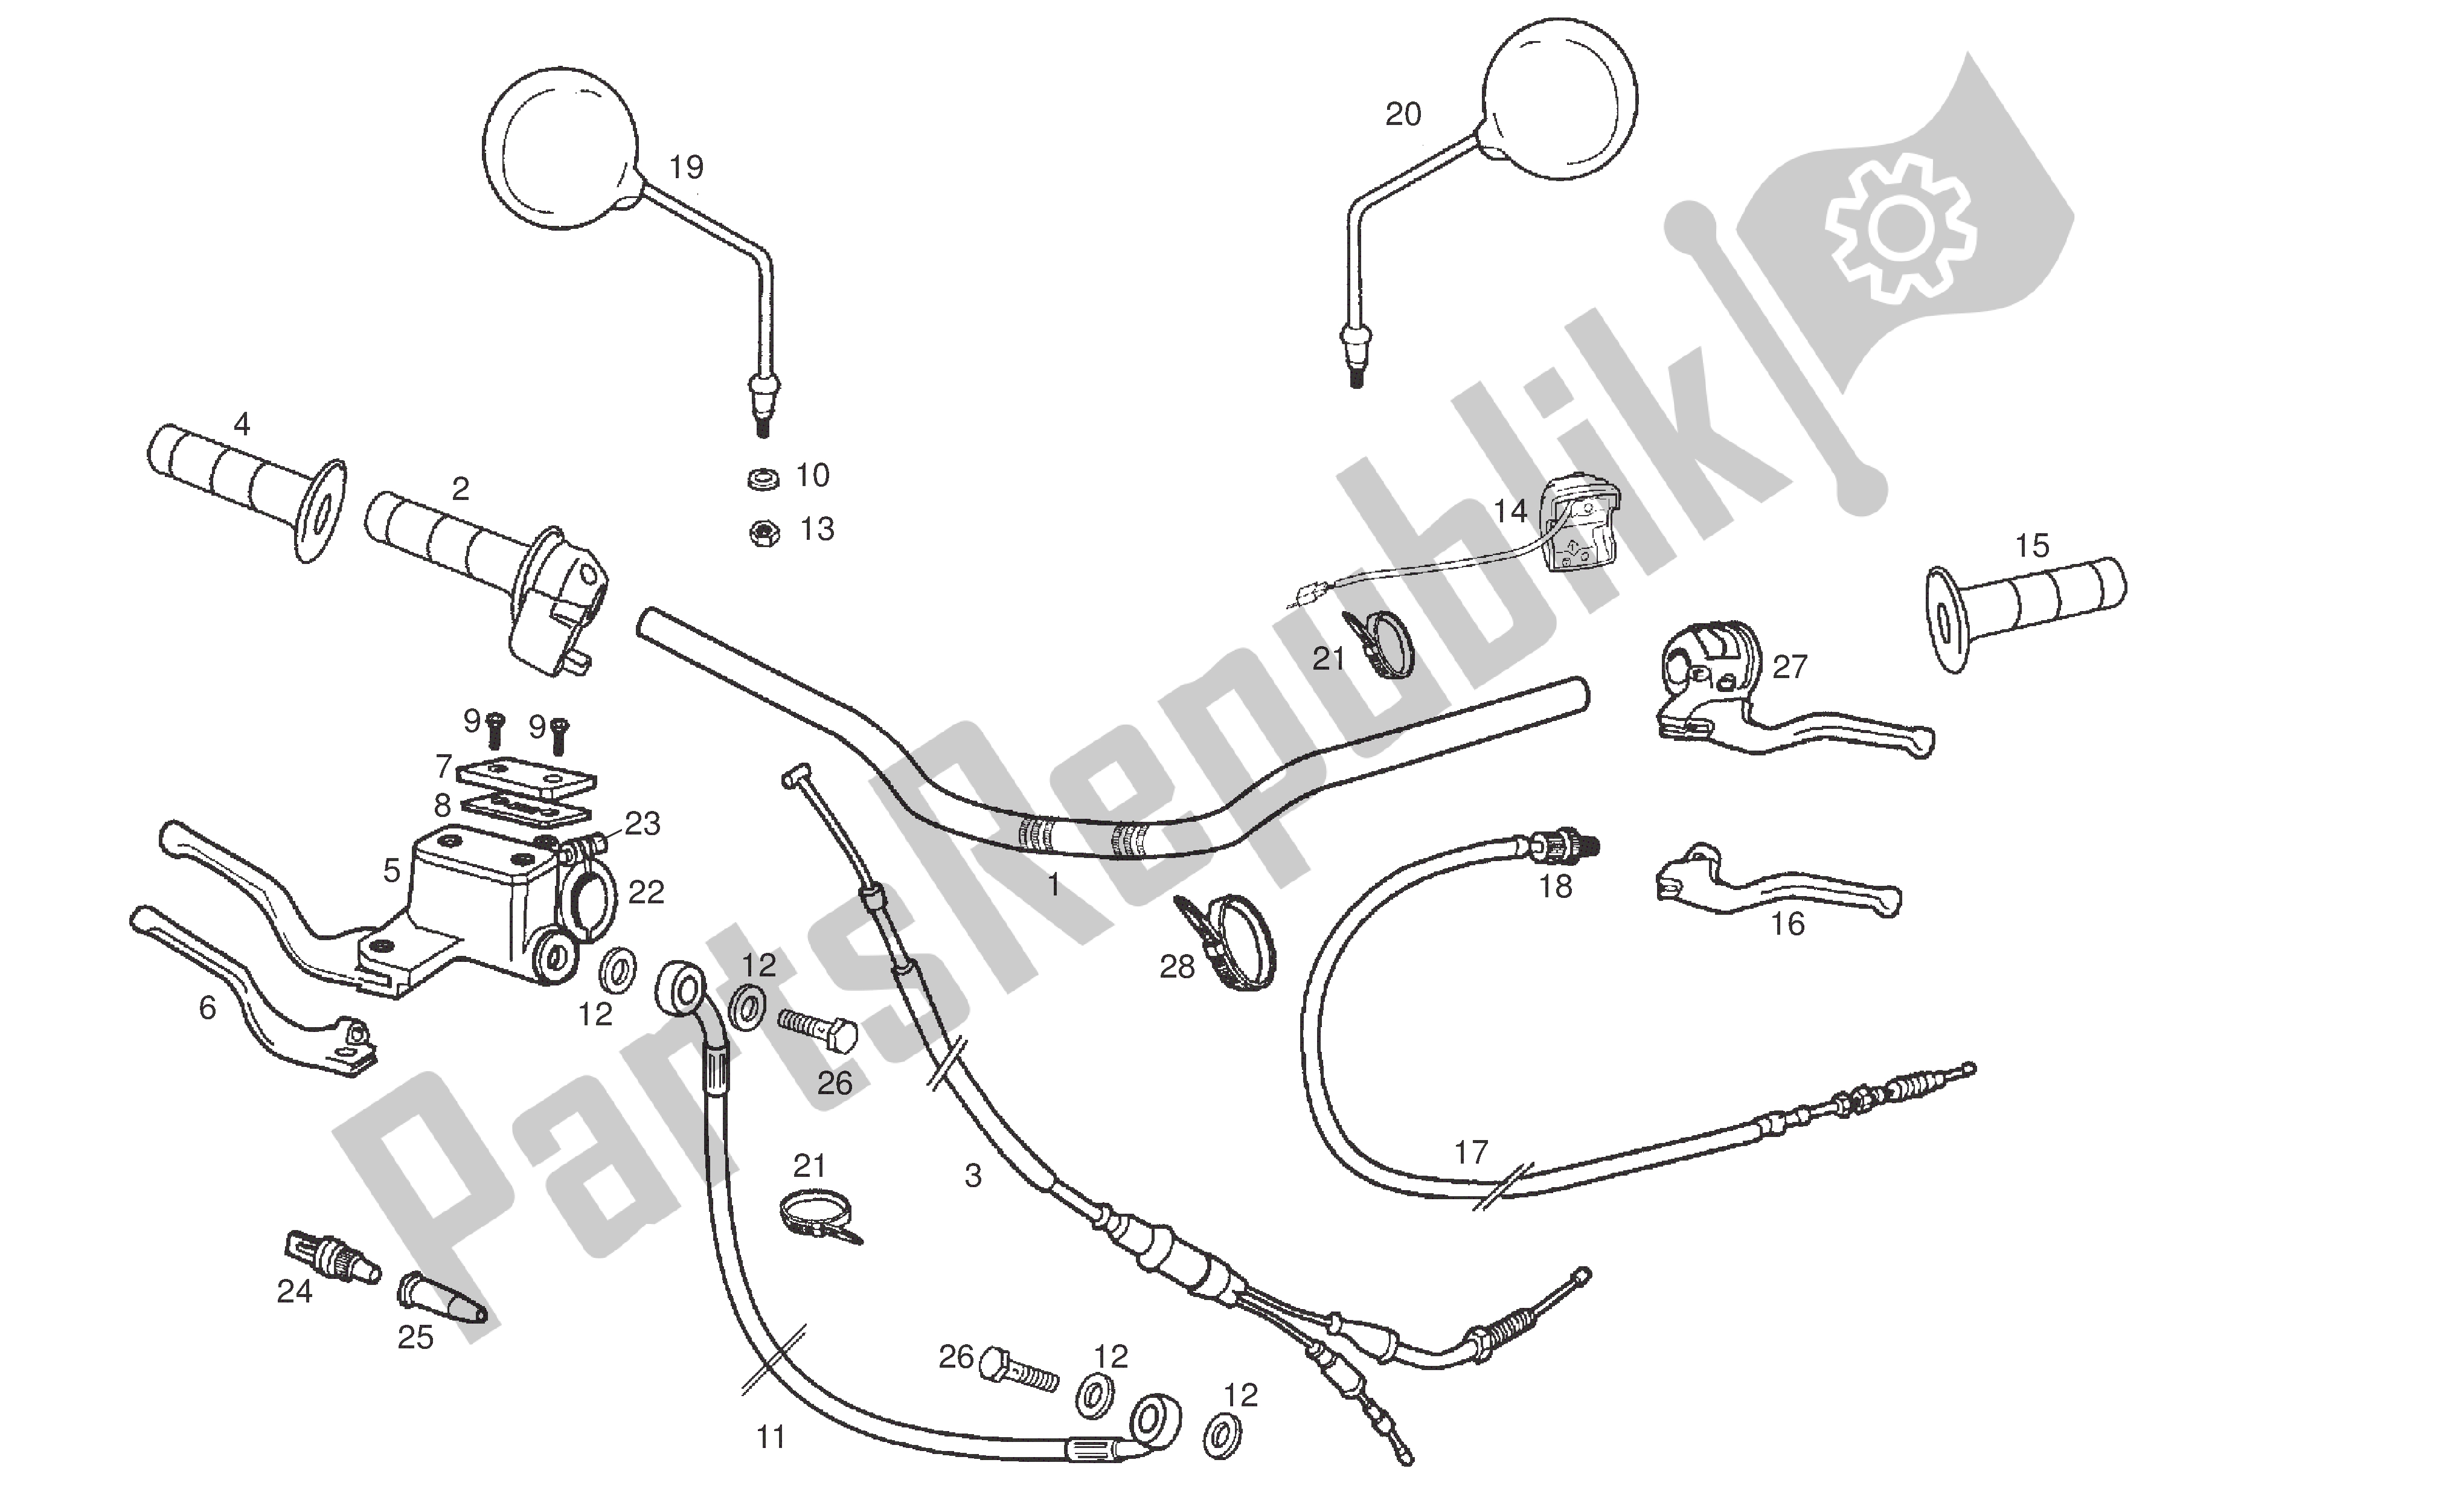 All parts for the Handlebar And Controls of the Derbi Senda DRD SM 50 2007